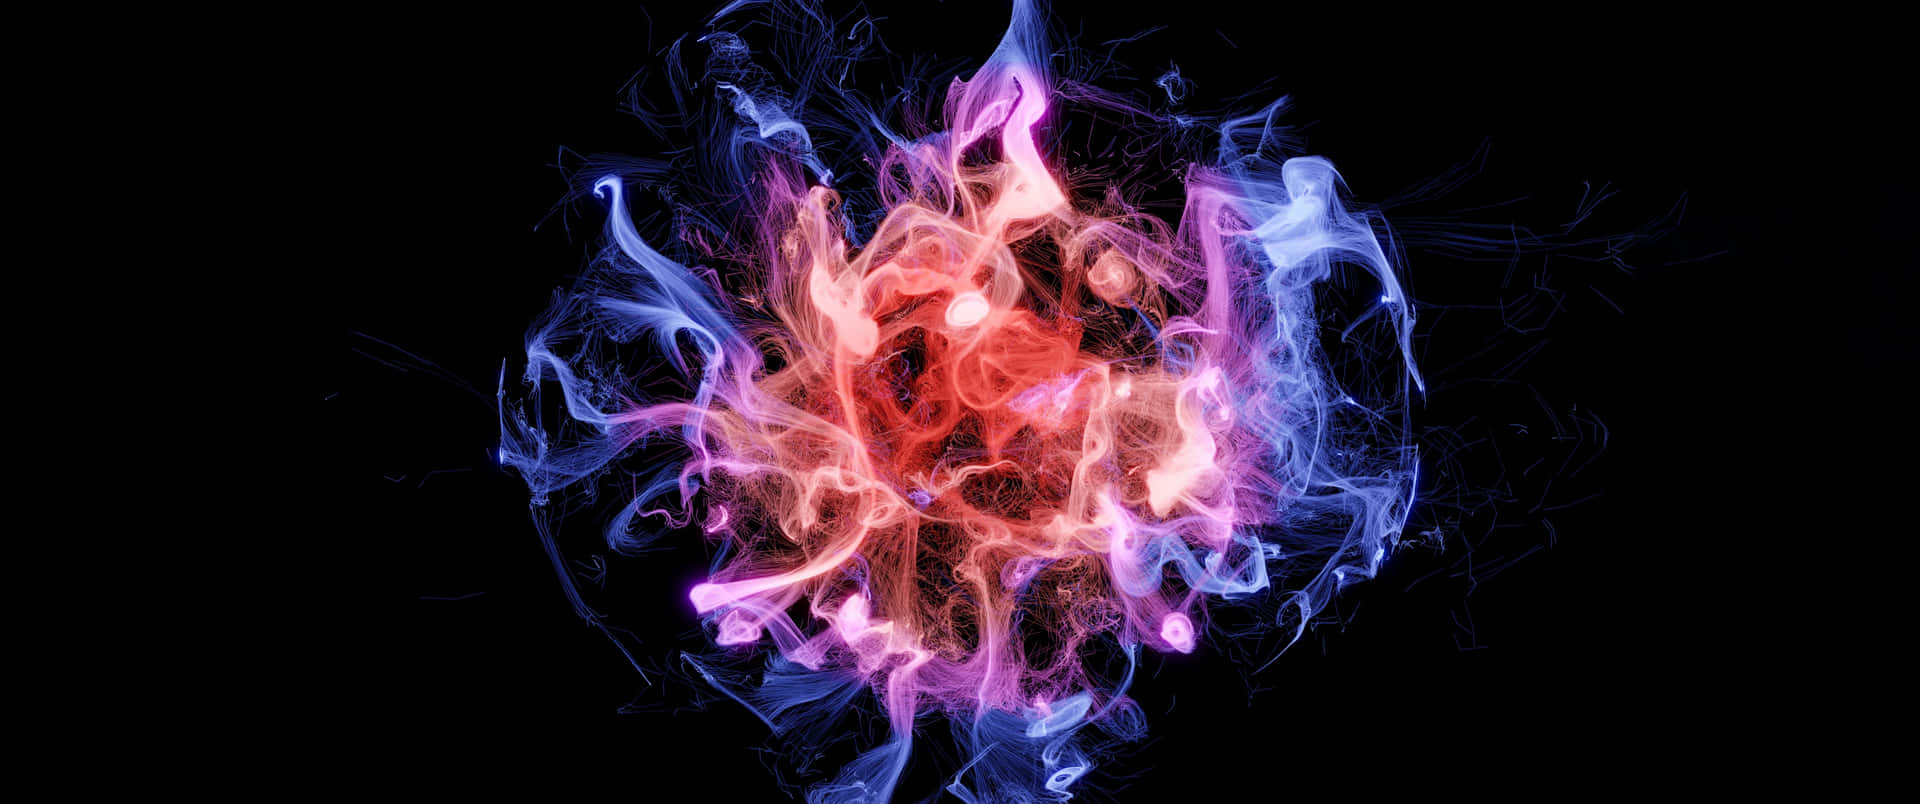 A Breath-taking Display Of Red&Blue Fire Wallpaper